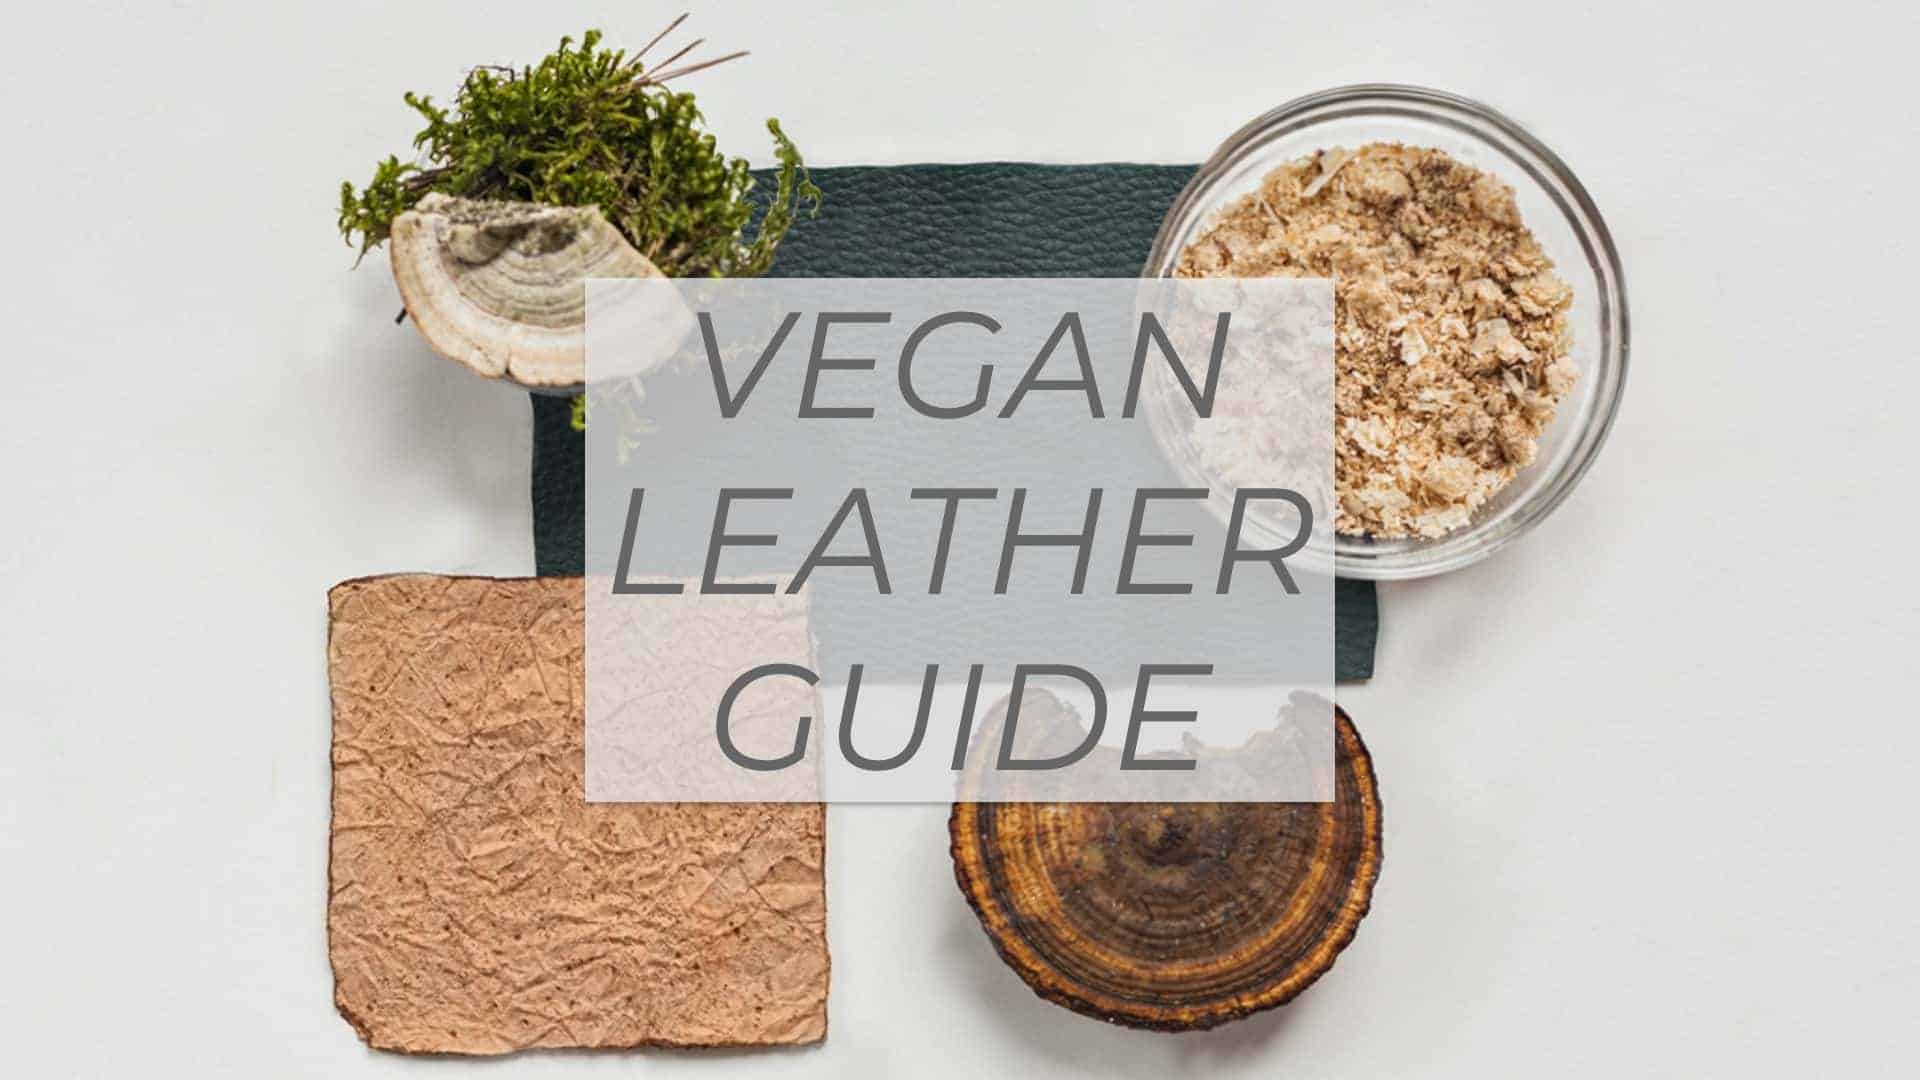 A vegan leather made of dormant fungi can repair itself